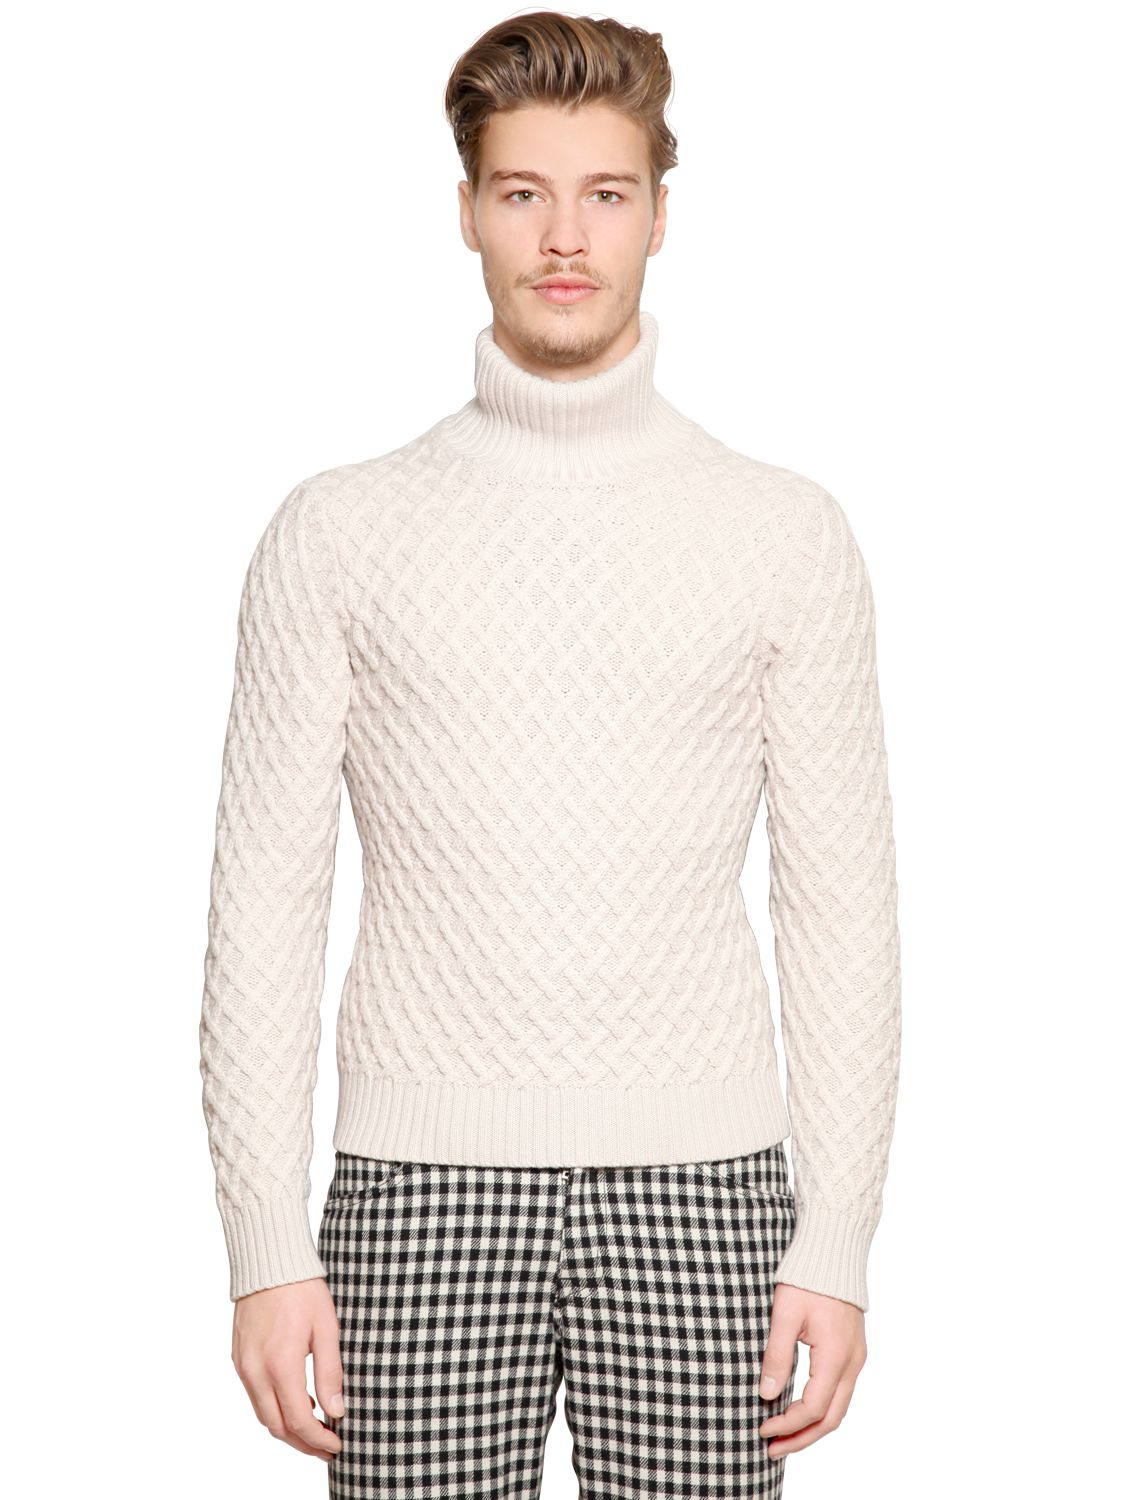 Lyst - Etro Waffle Knit Wool Turtleneck Sweater in Natural for Men